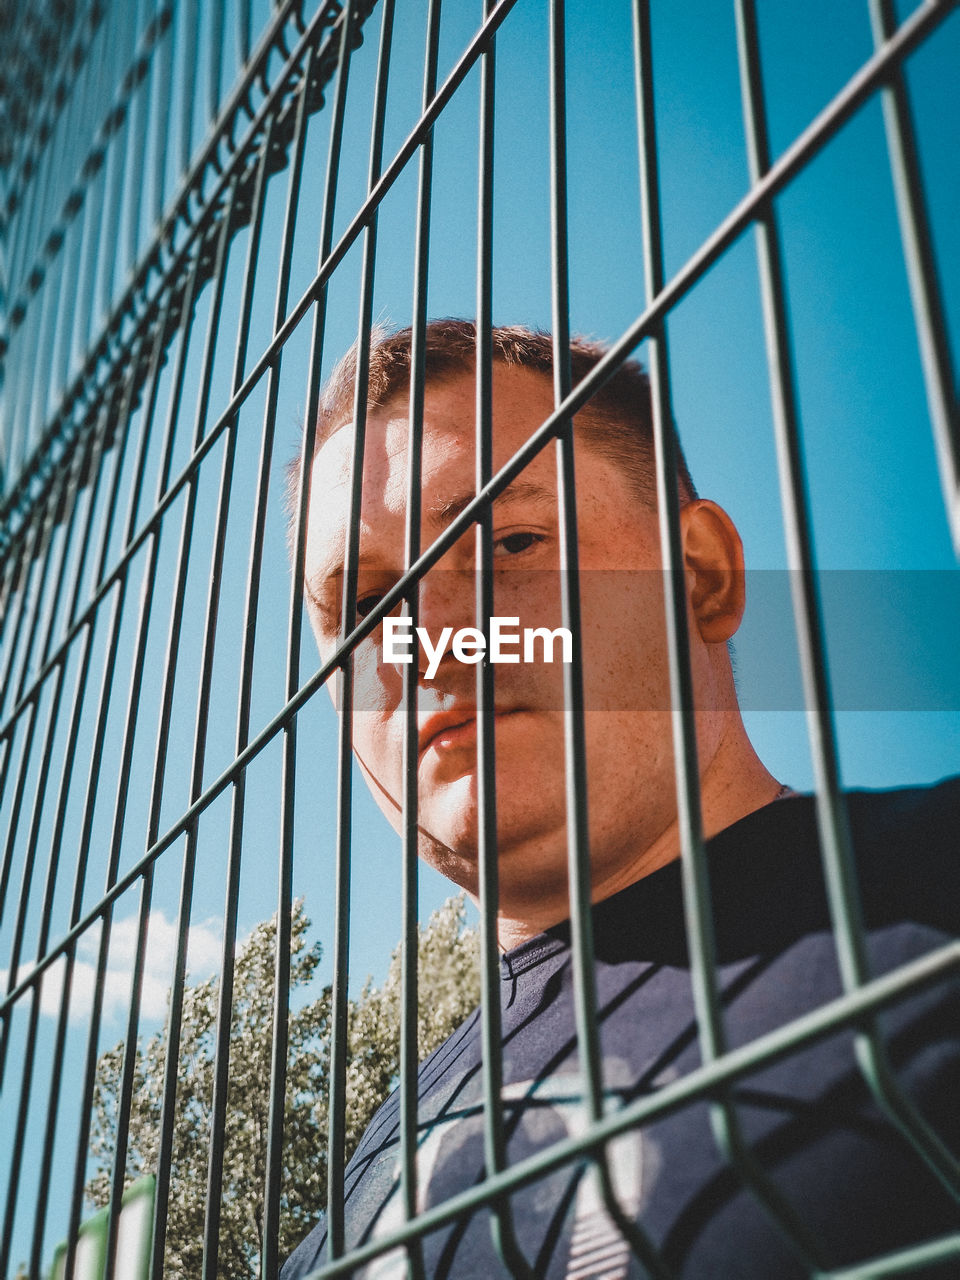 Low angle portrait of man seen through fence